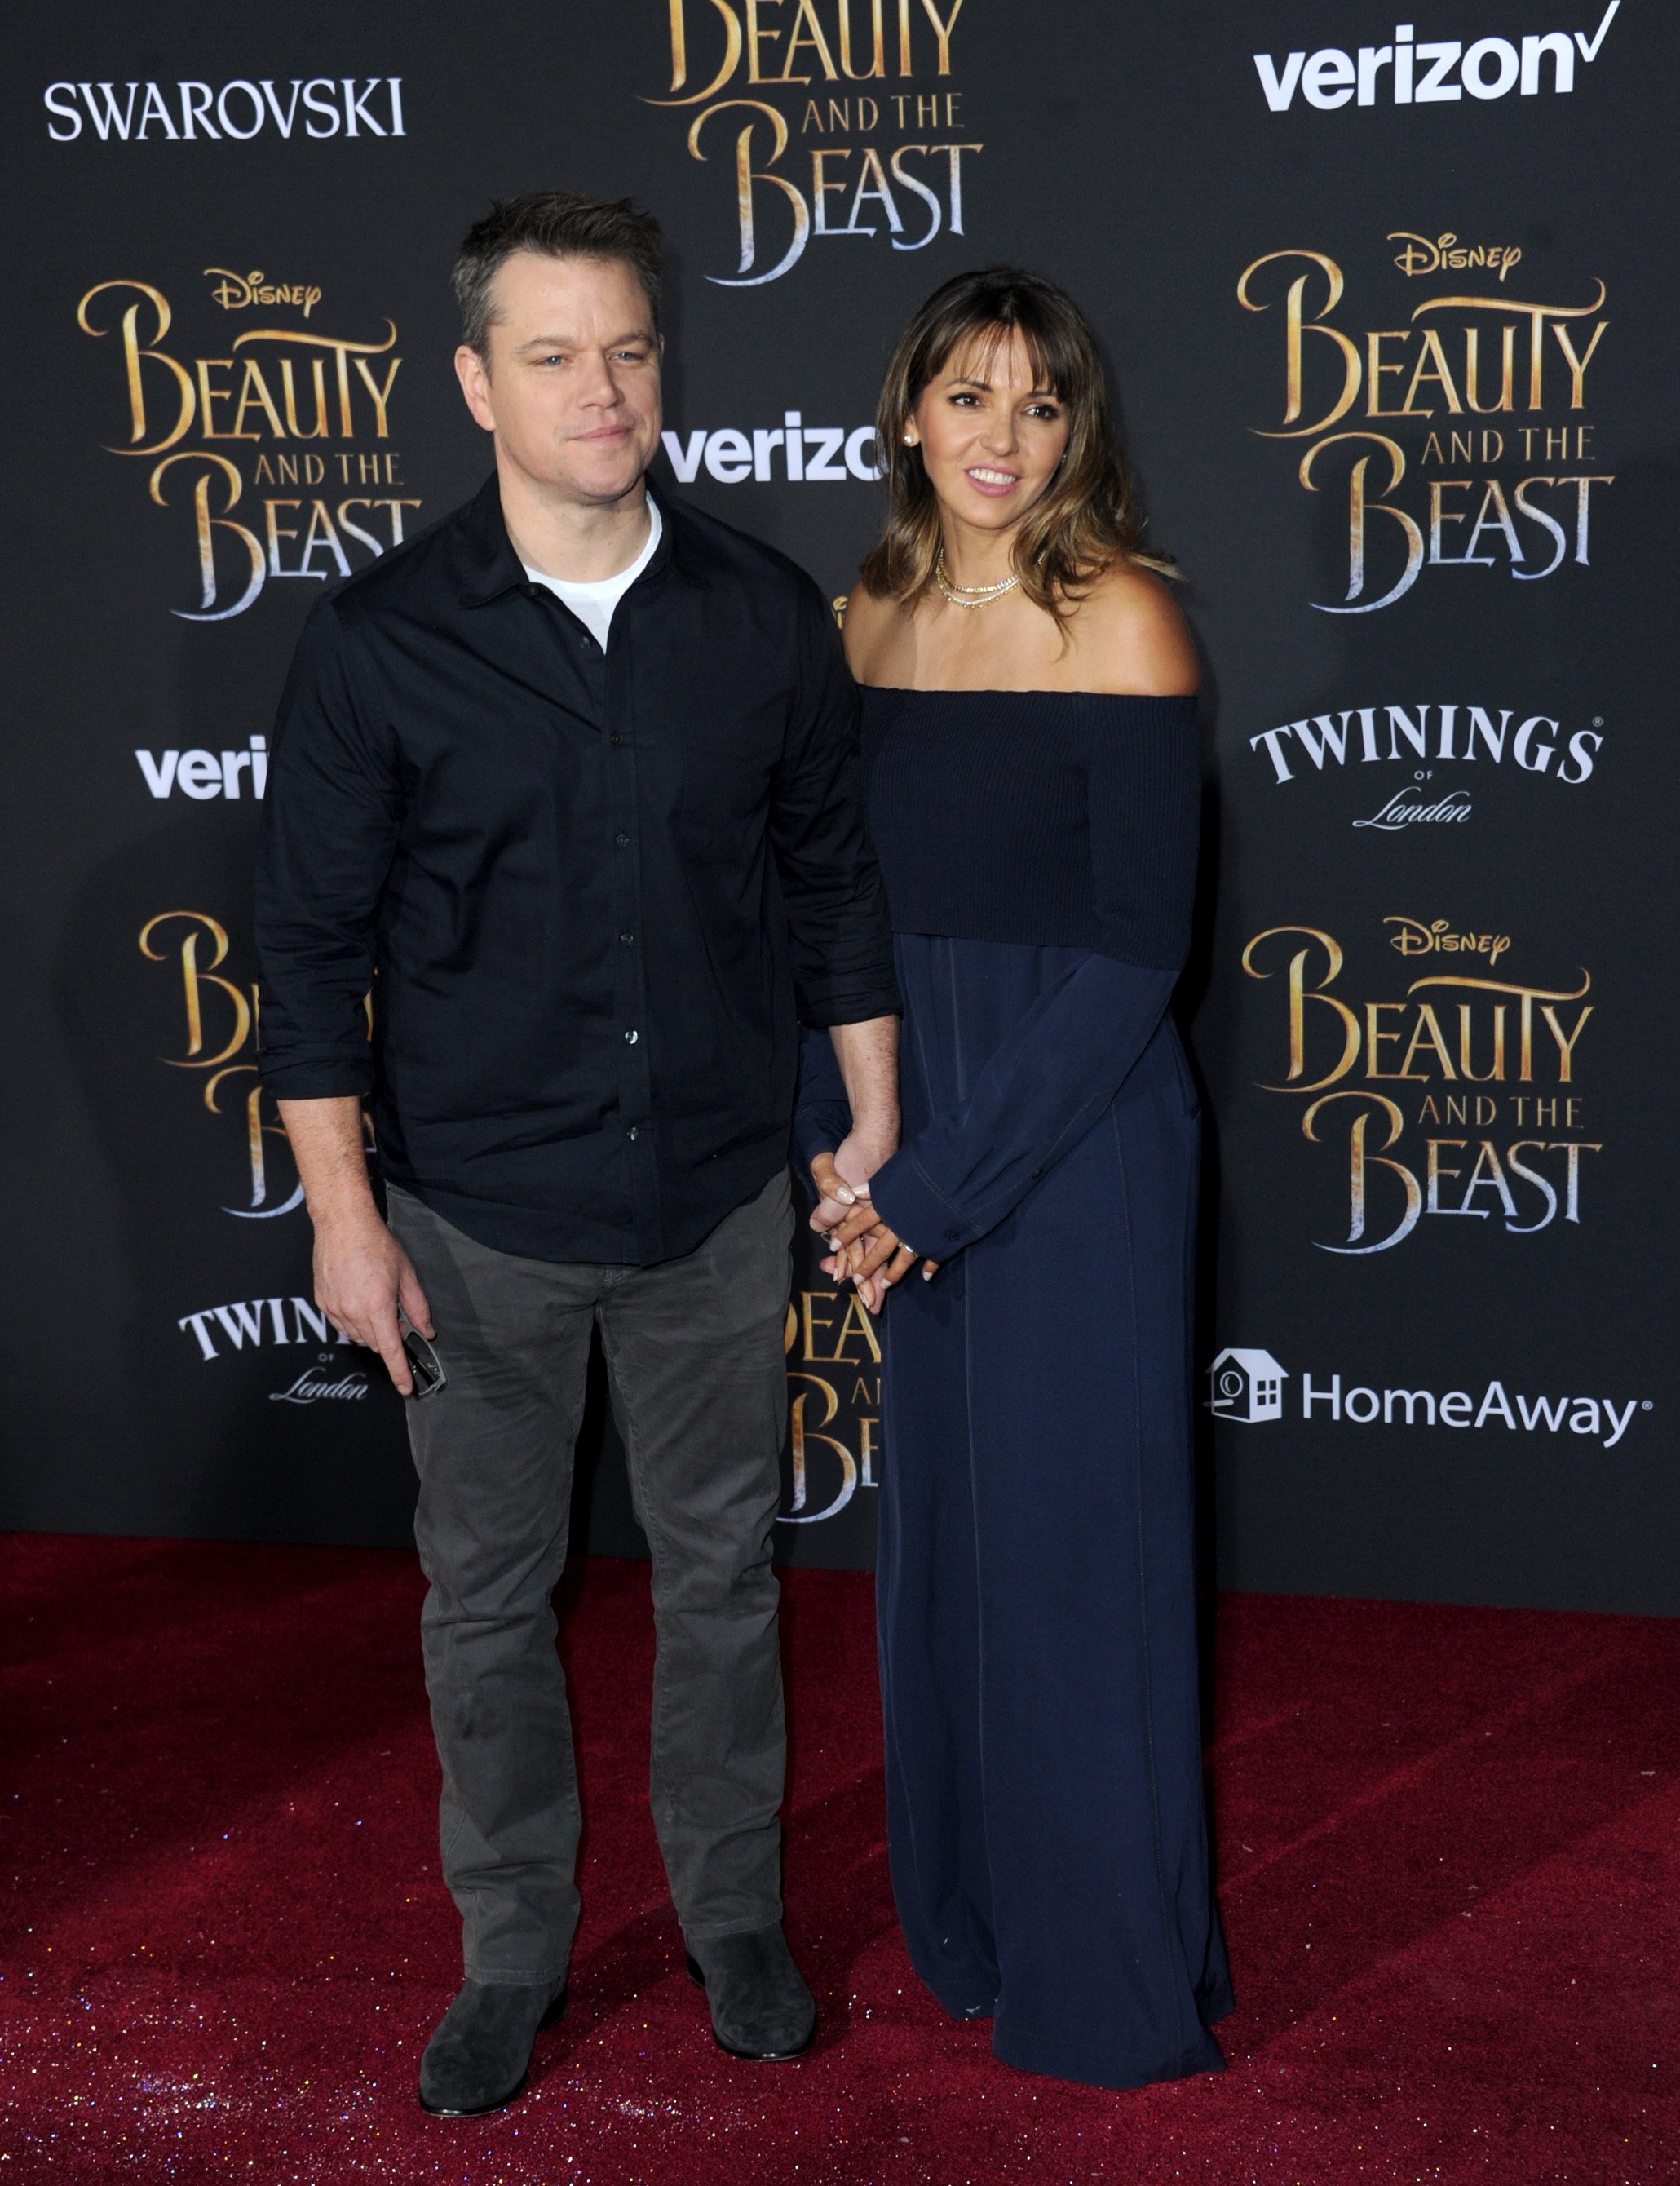 Matt Damon and wife Luciana Damon arrive for the Premiere Of Disney's "Beauty And The Beast" held at El Capitan Theatre on March 2, 2017 in Los Angeles, California | Source: Getty Images 